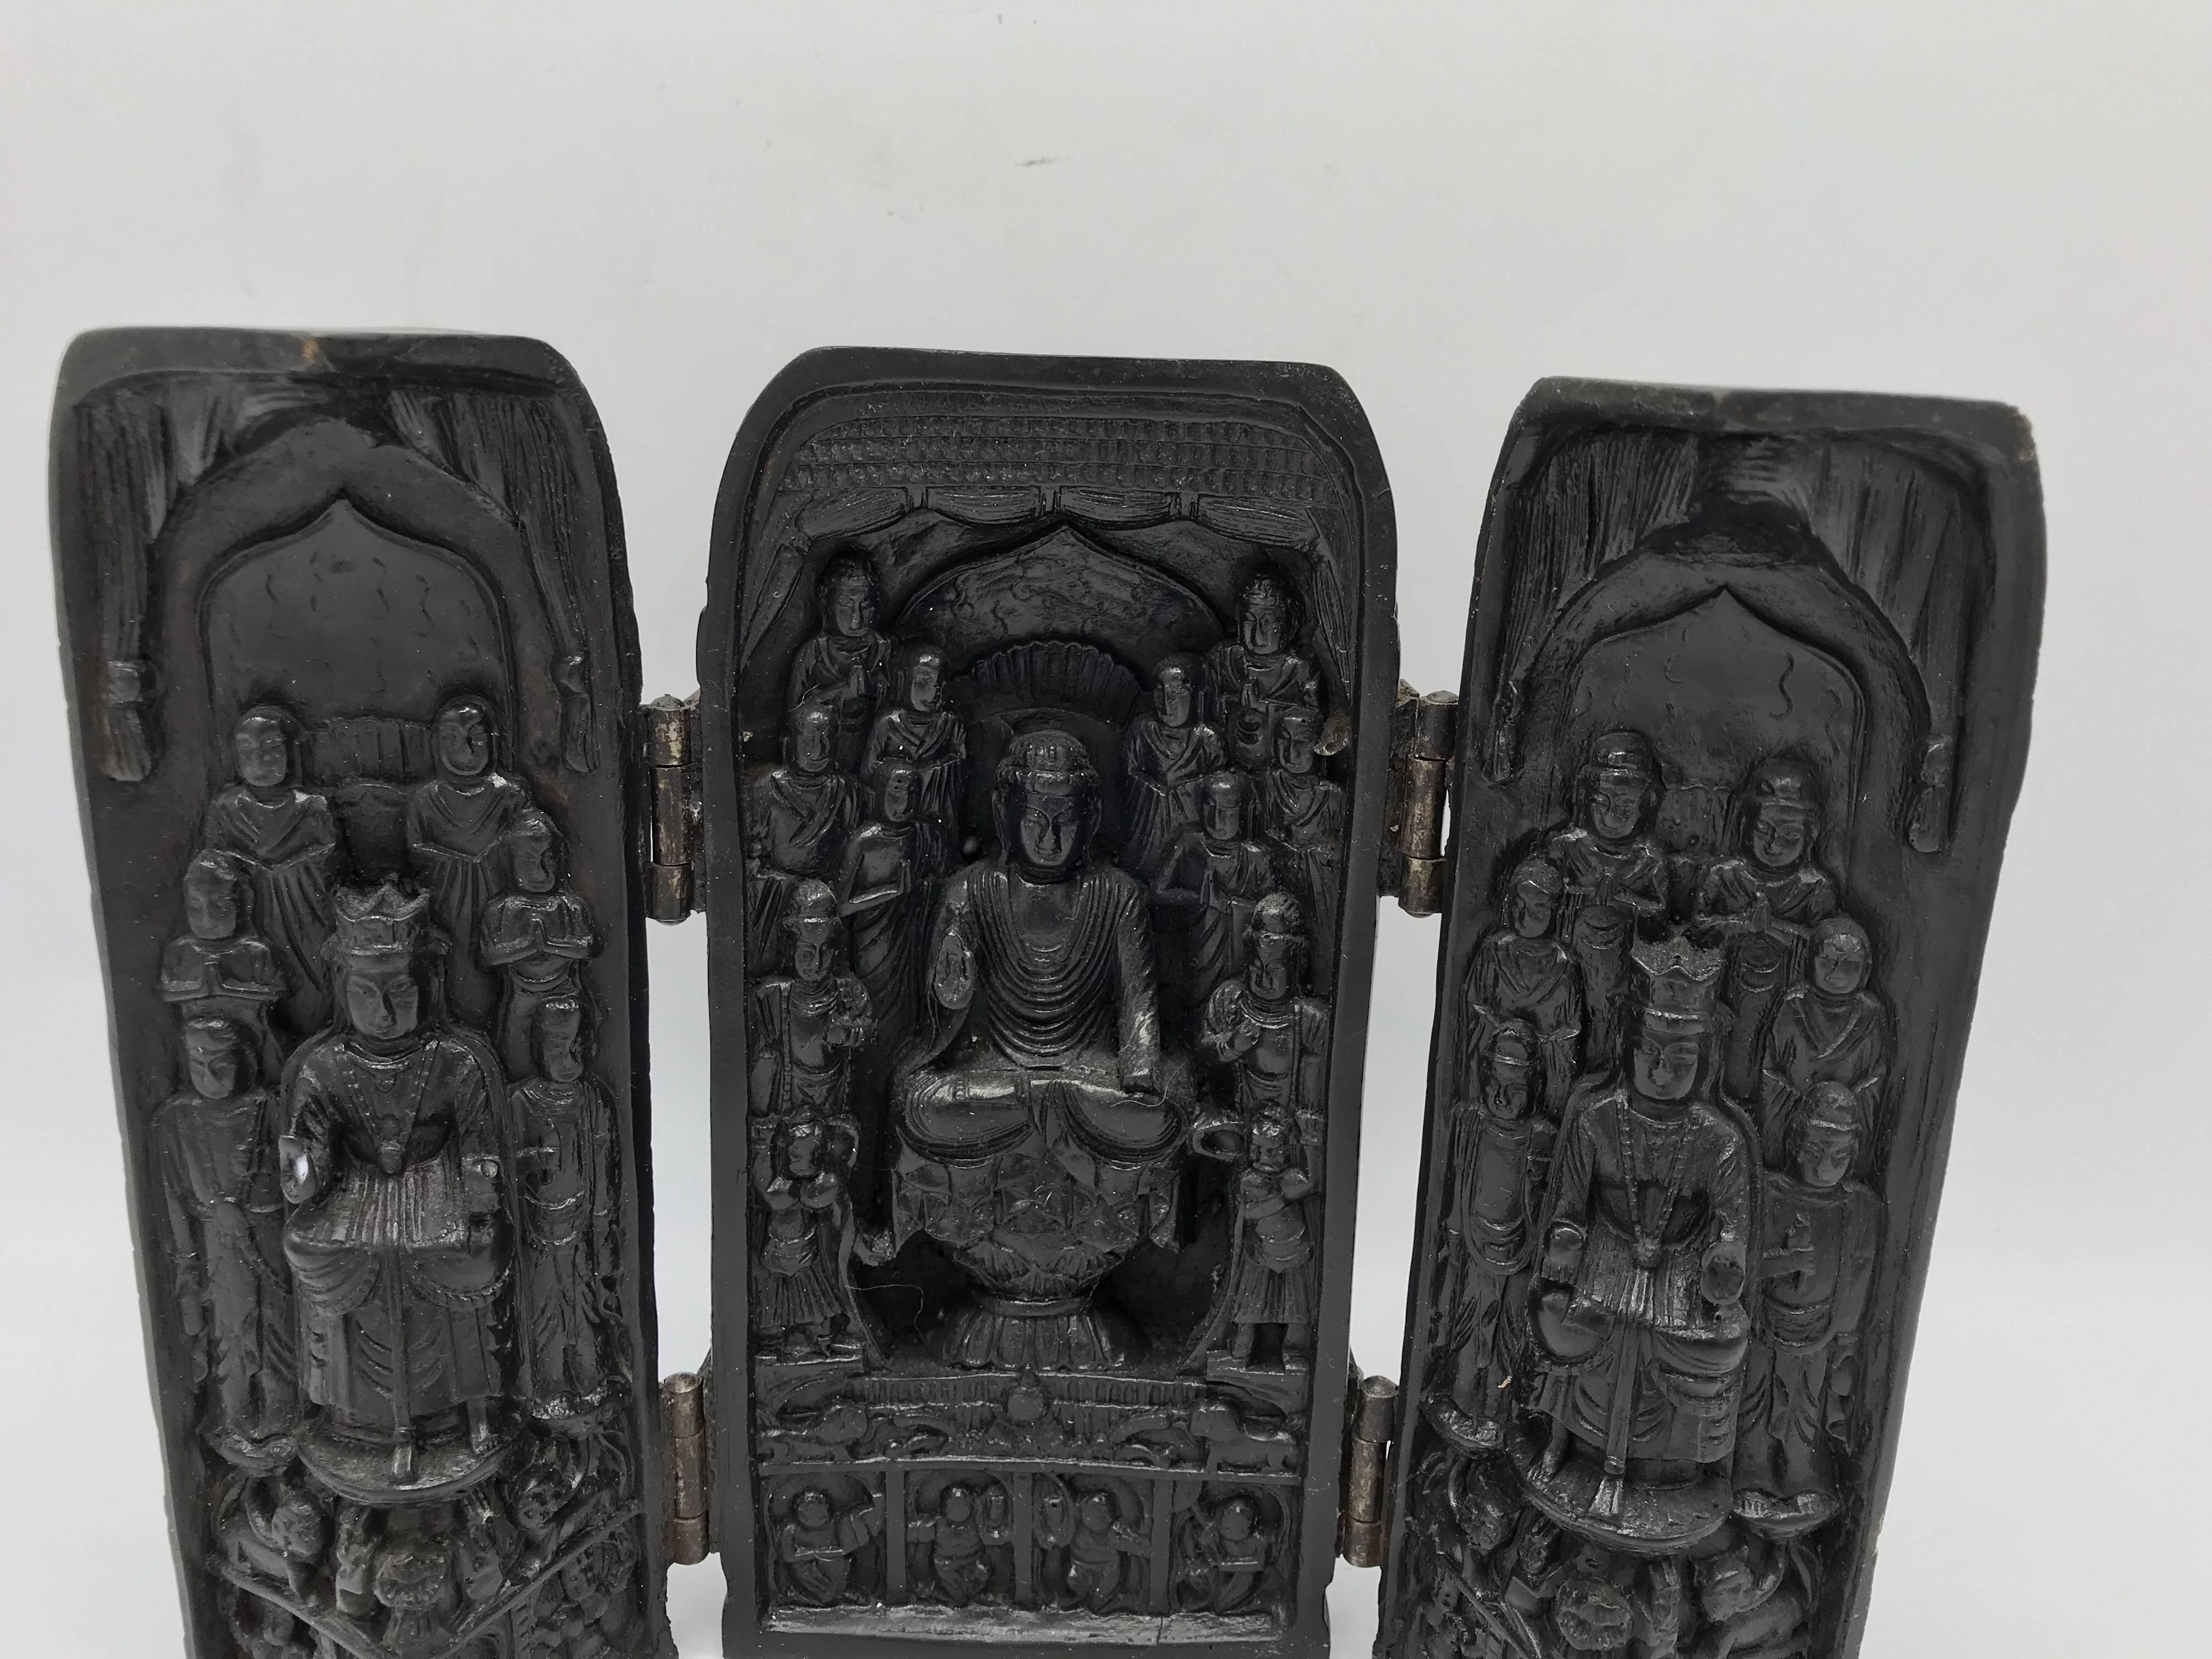 Chinoiserie 1970s Asian Buddha Temple Reliquary Shrine Trifold Sculpture